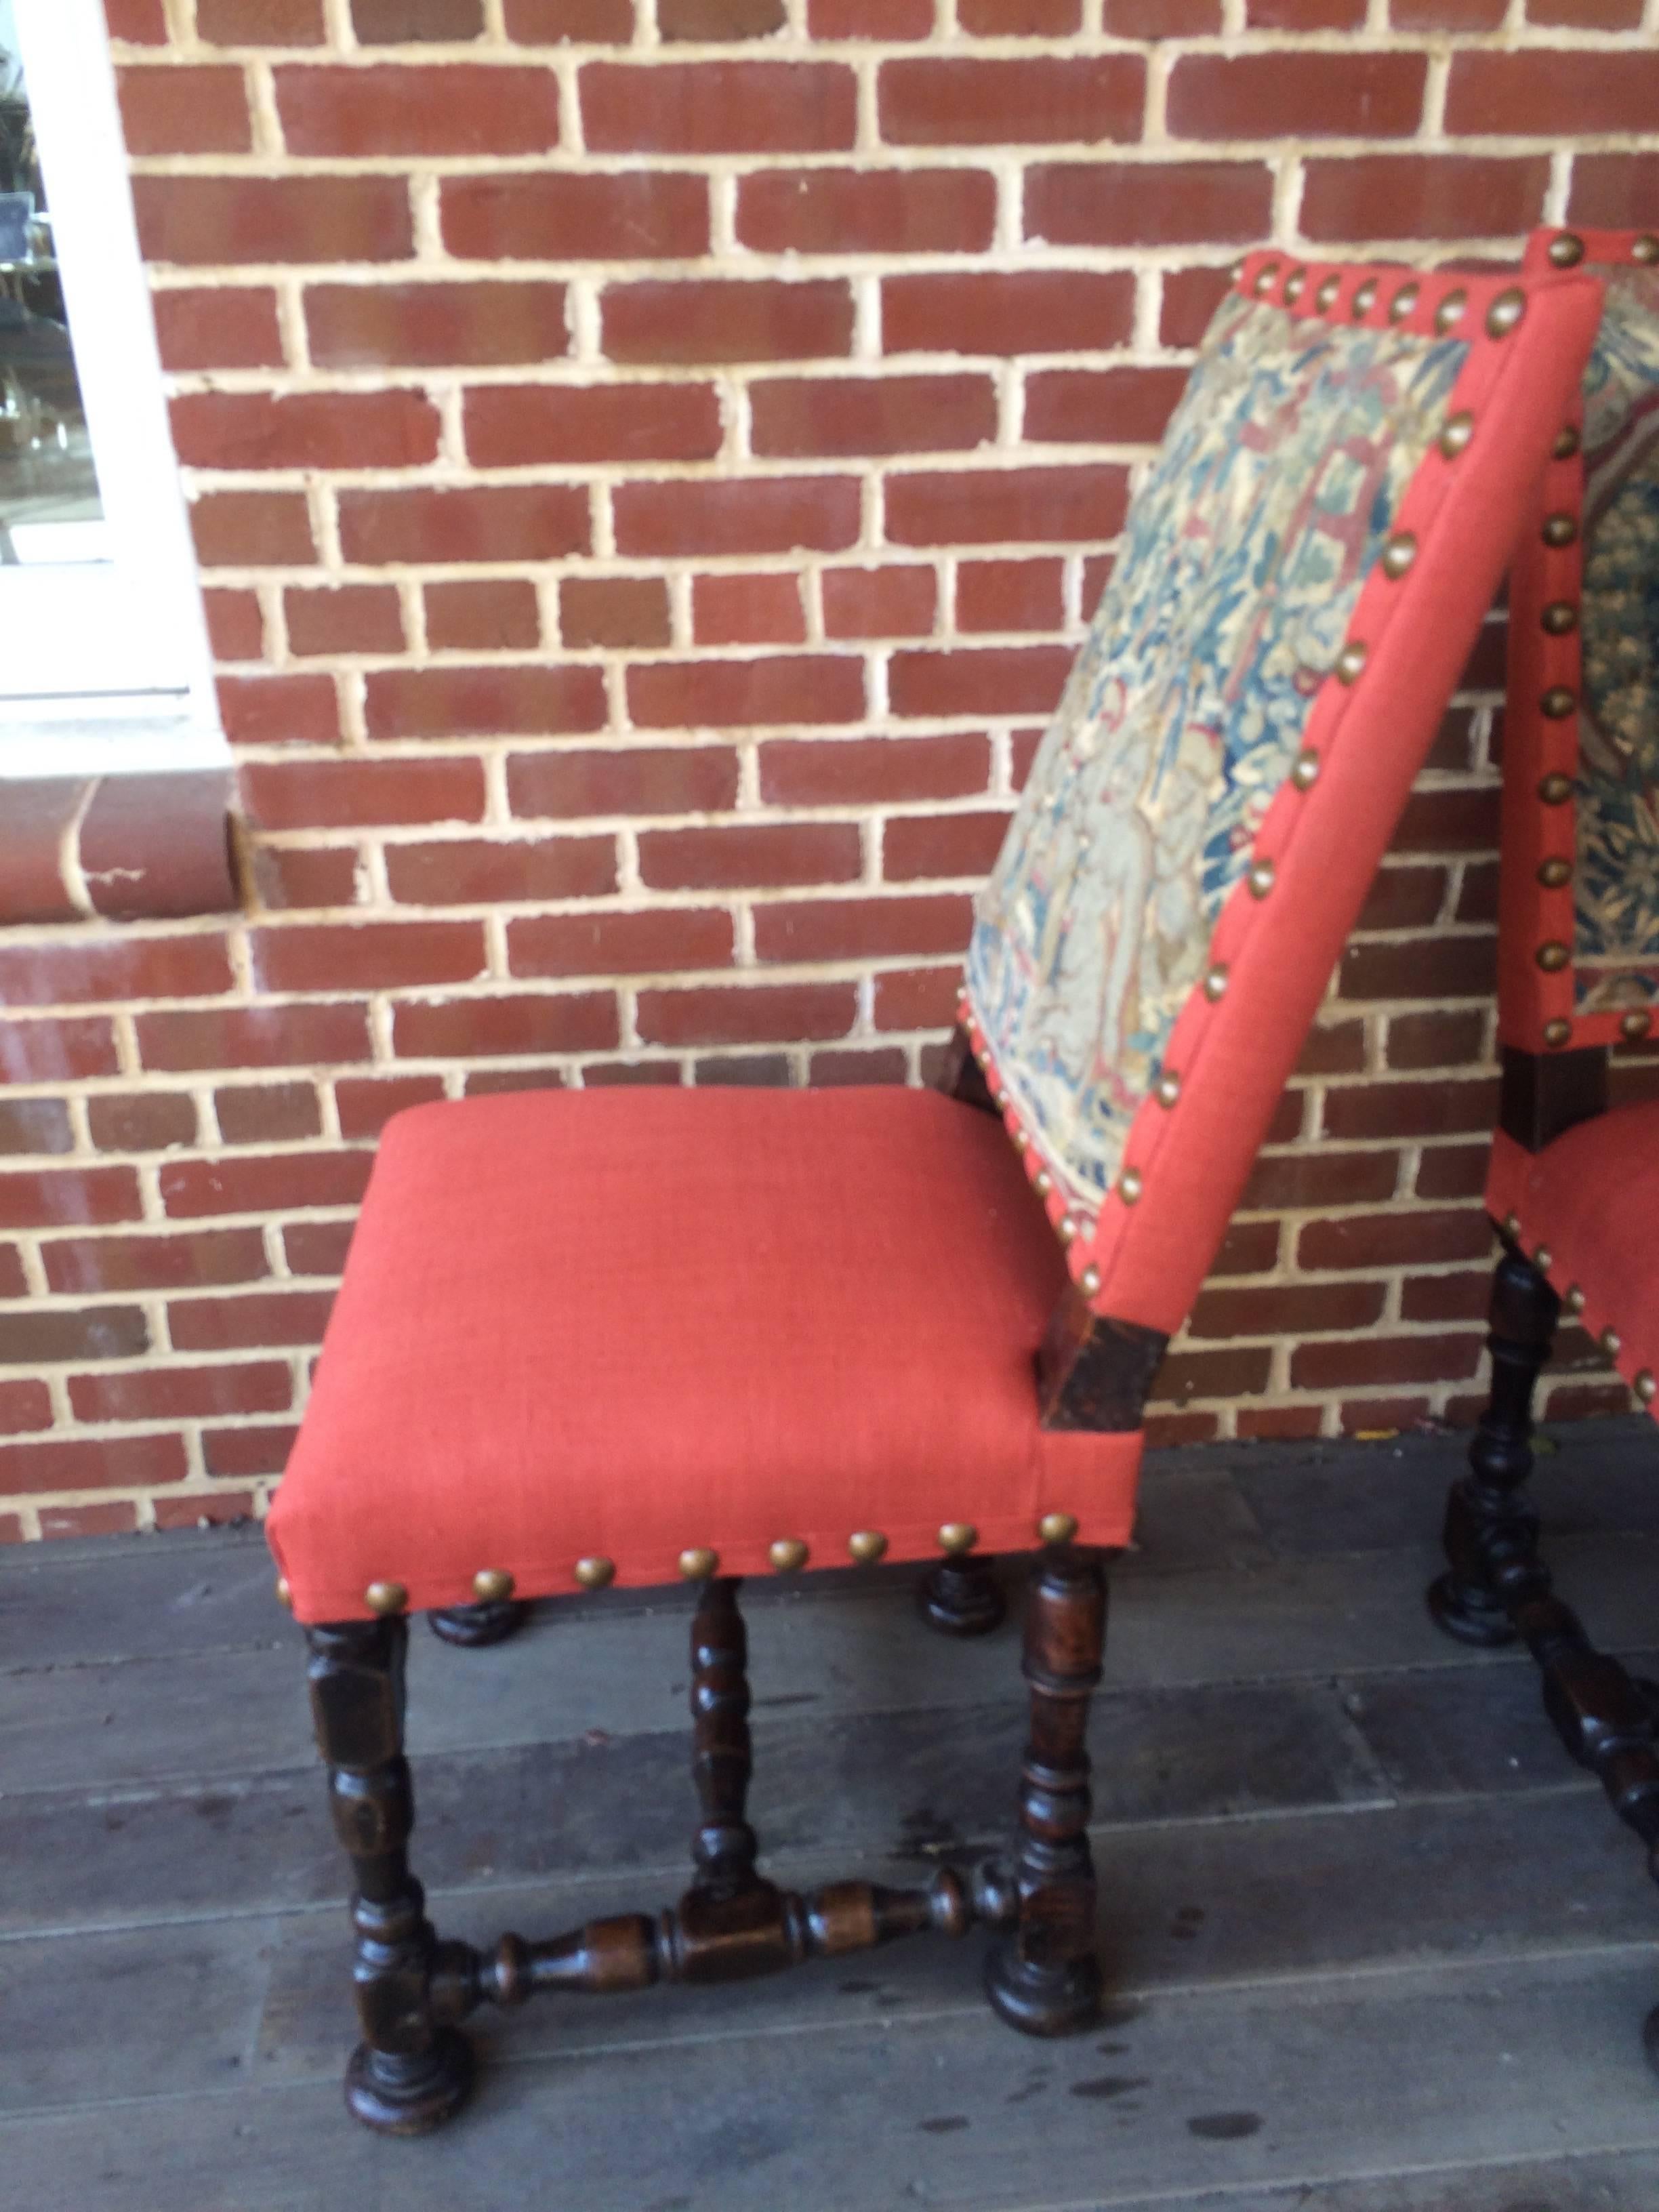 A rare pair of 17th century Louis XIV period side chairs. Intricately turned legs and cross stretchers made of European brown oak with a deep patination and rich lustrous color. Retaining the original period needlepoint tapestry on the backs with